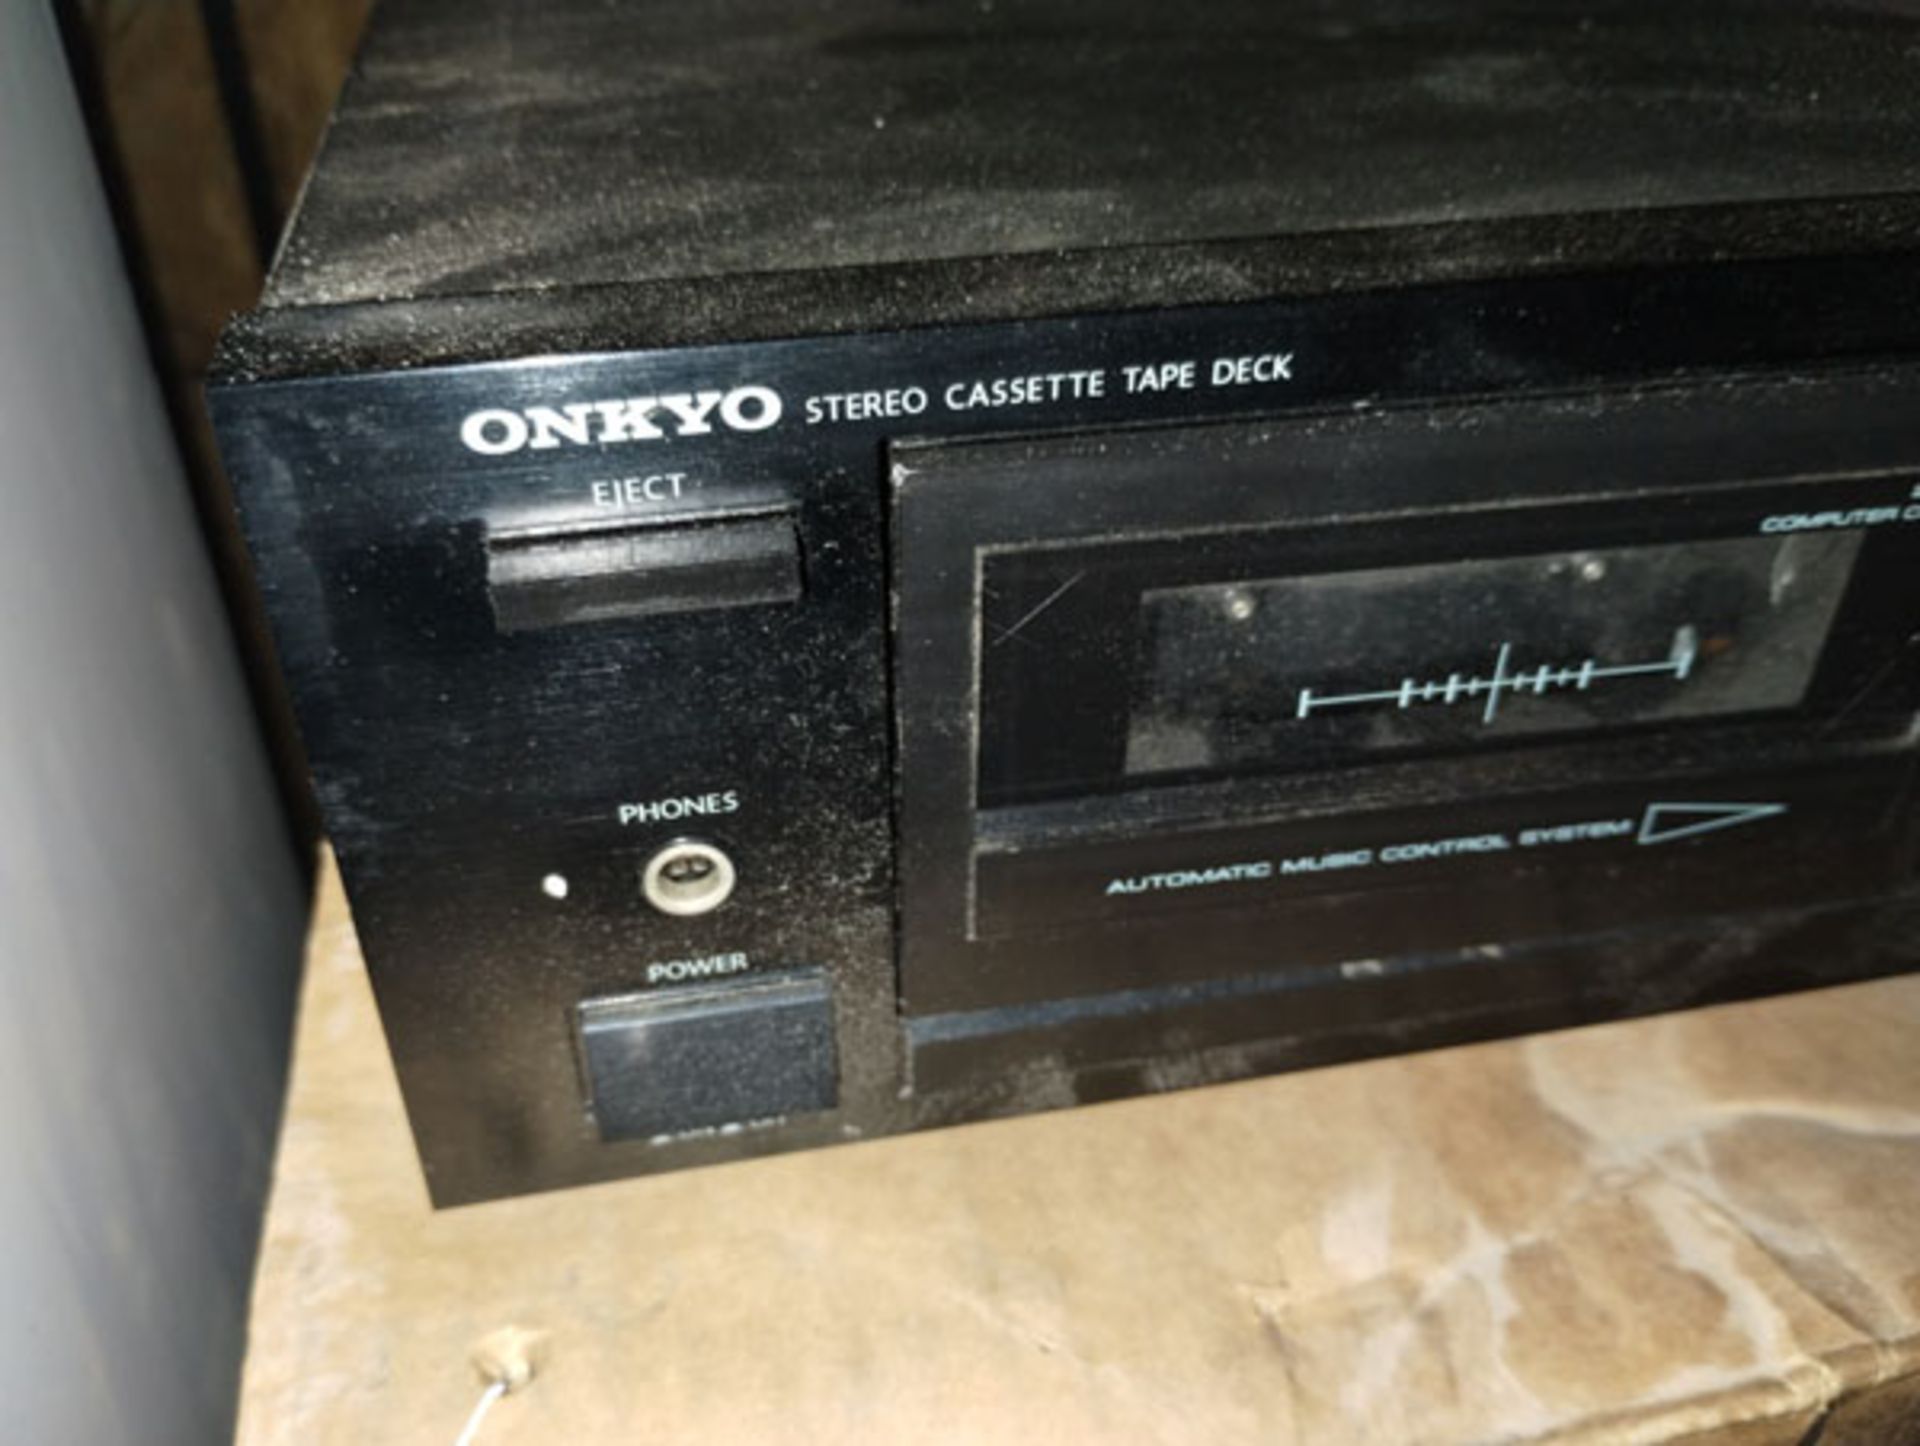 ONKYO TA-2130 STEREO CASSETTE TAPE DECK - AS IS - Image 2 of 7